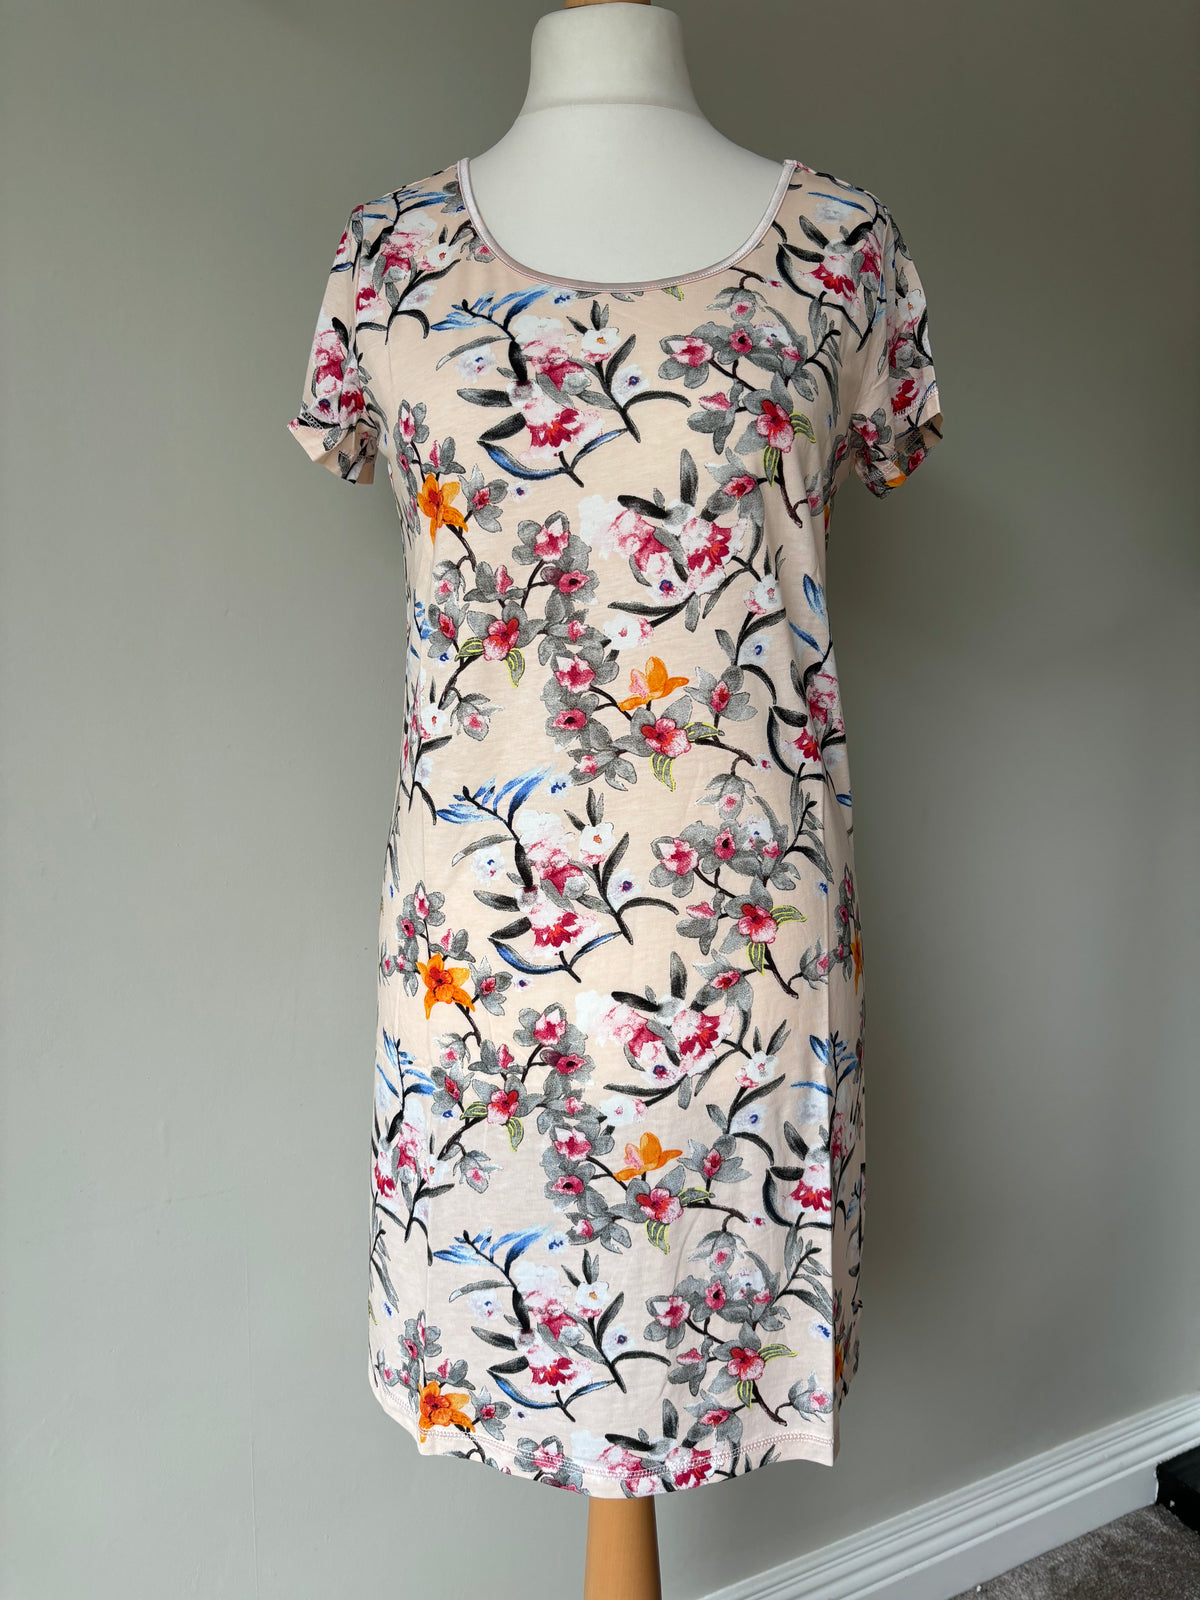 Peach floral night dress by S.Oliver Size 10/12